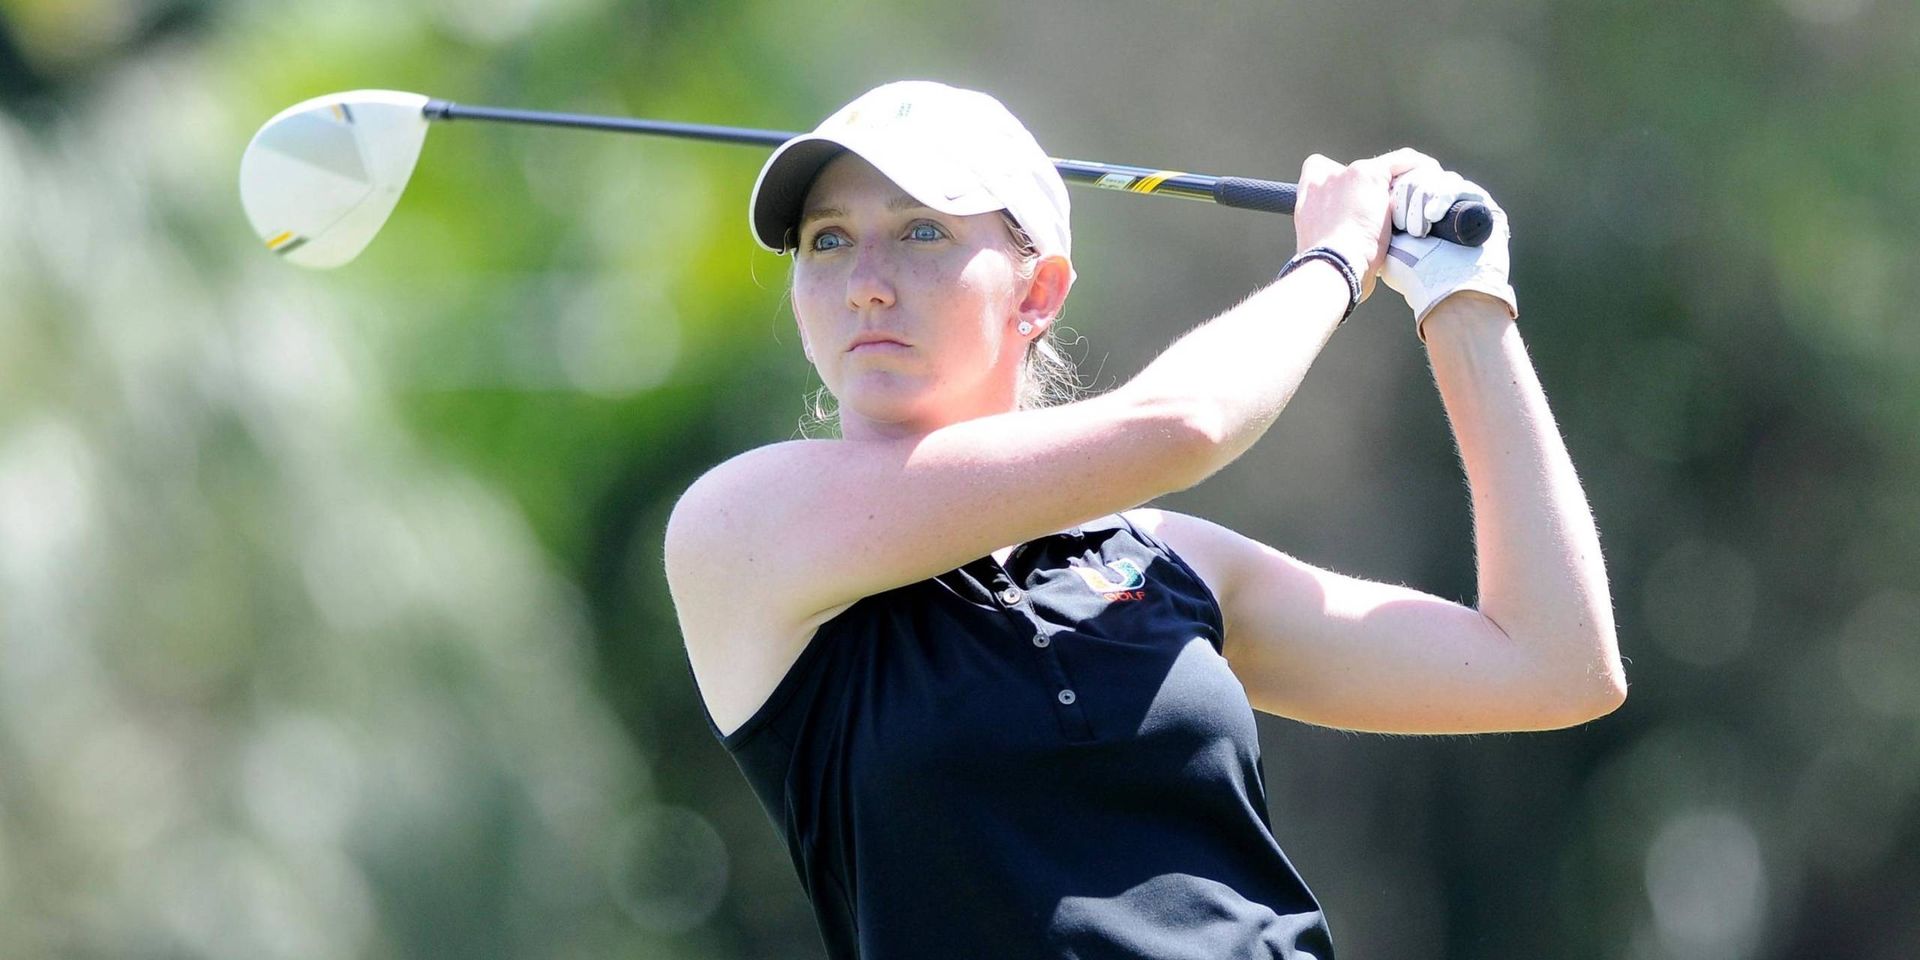 No. 30 Golf In 3rd at Hurricane Invitational